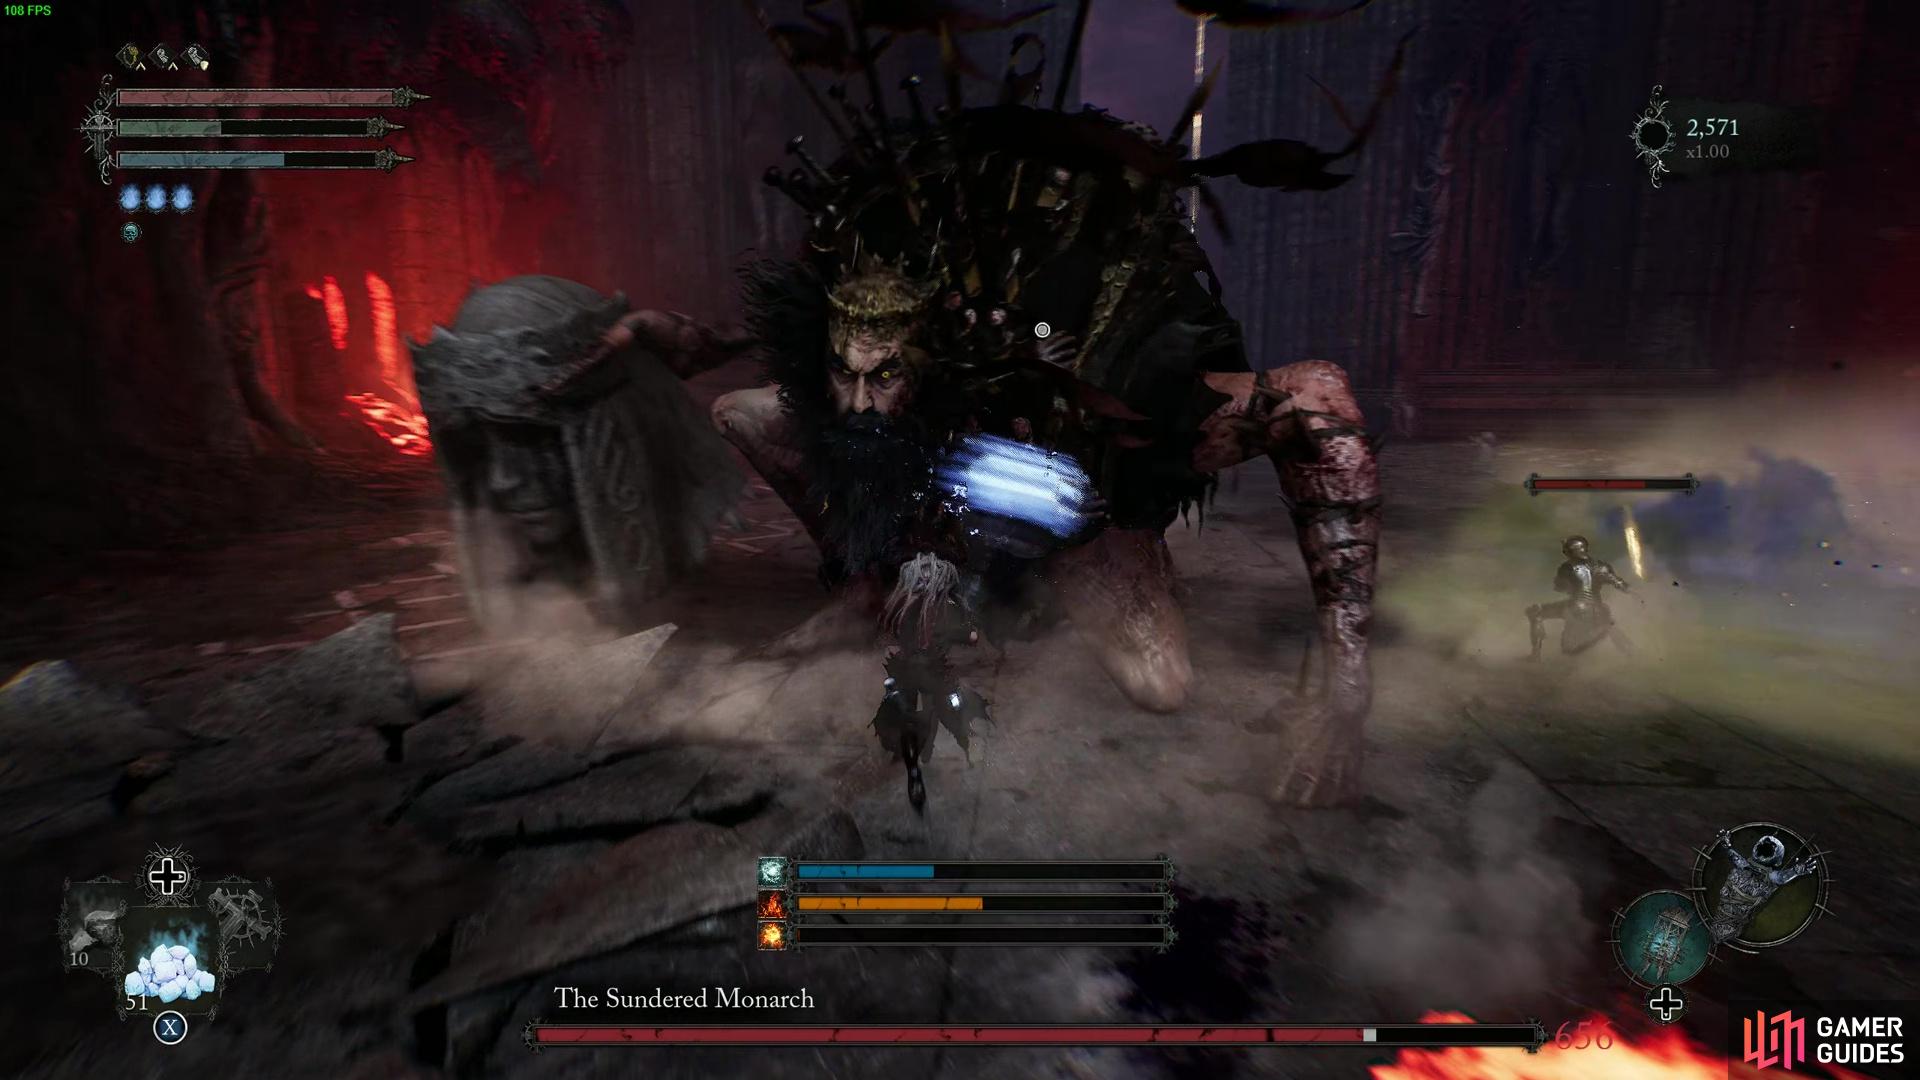 The Queen’s Head Hammer is the boss weapon from the Sundered Monarch.